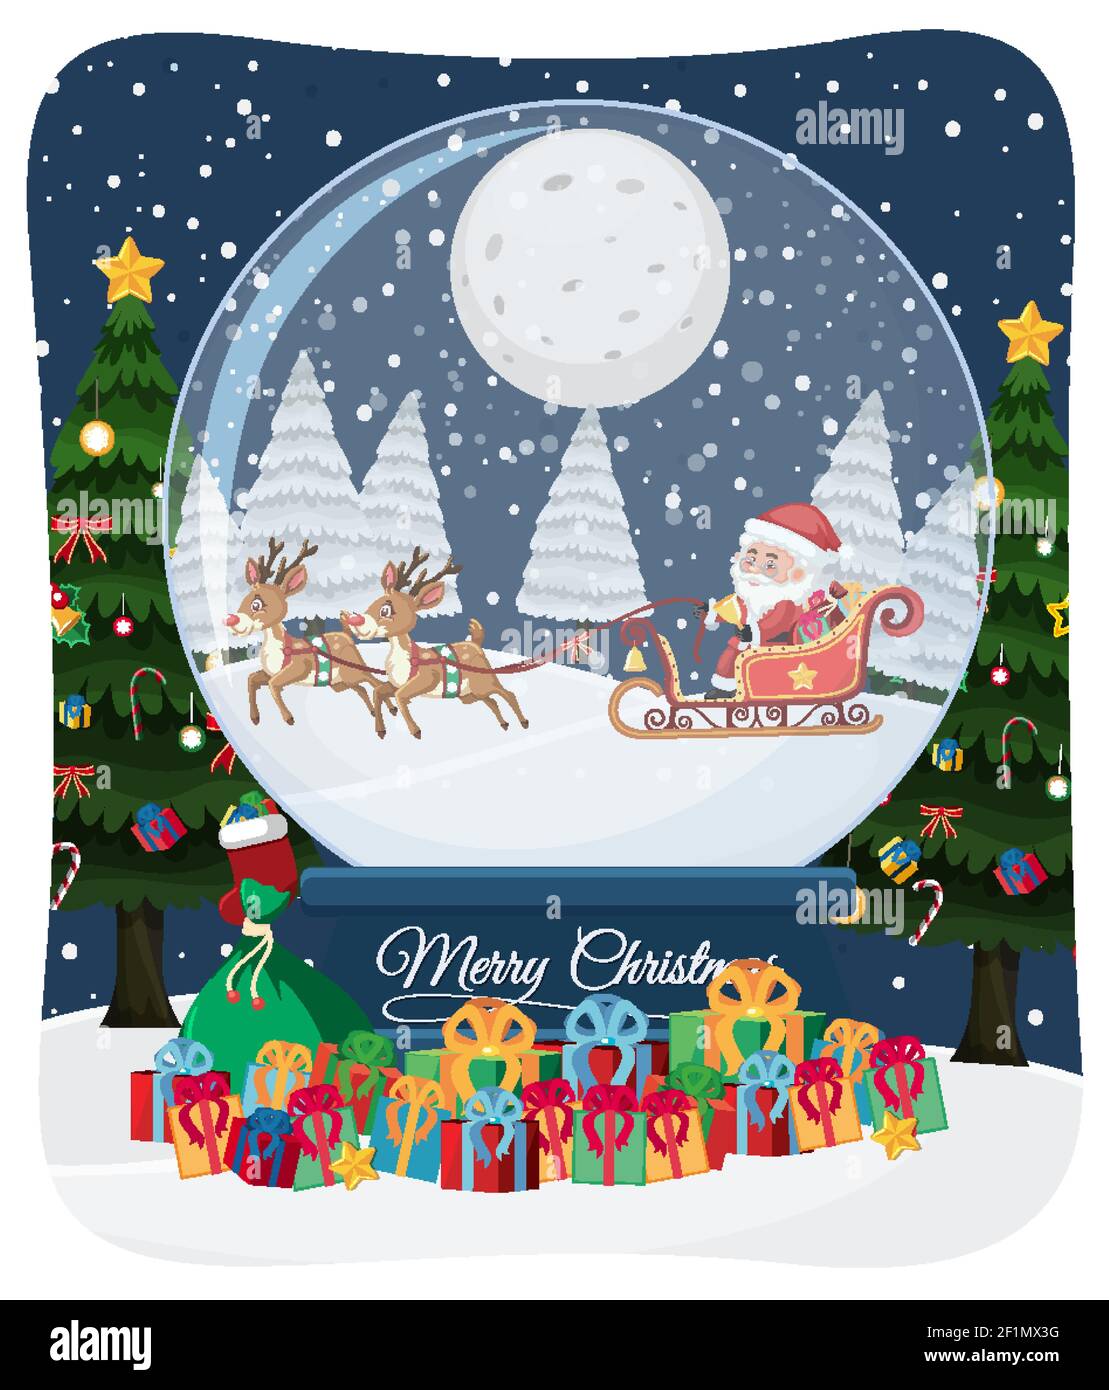 Merry Christmas font with Santa Claus in snow scene illustration Stock Vector